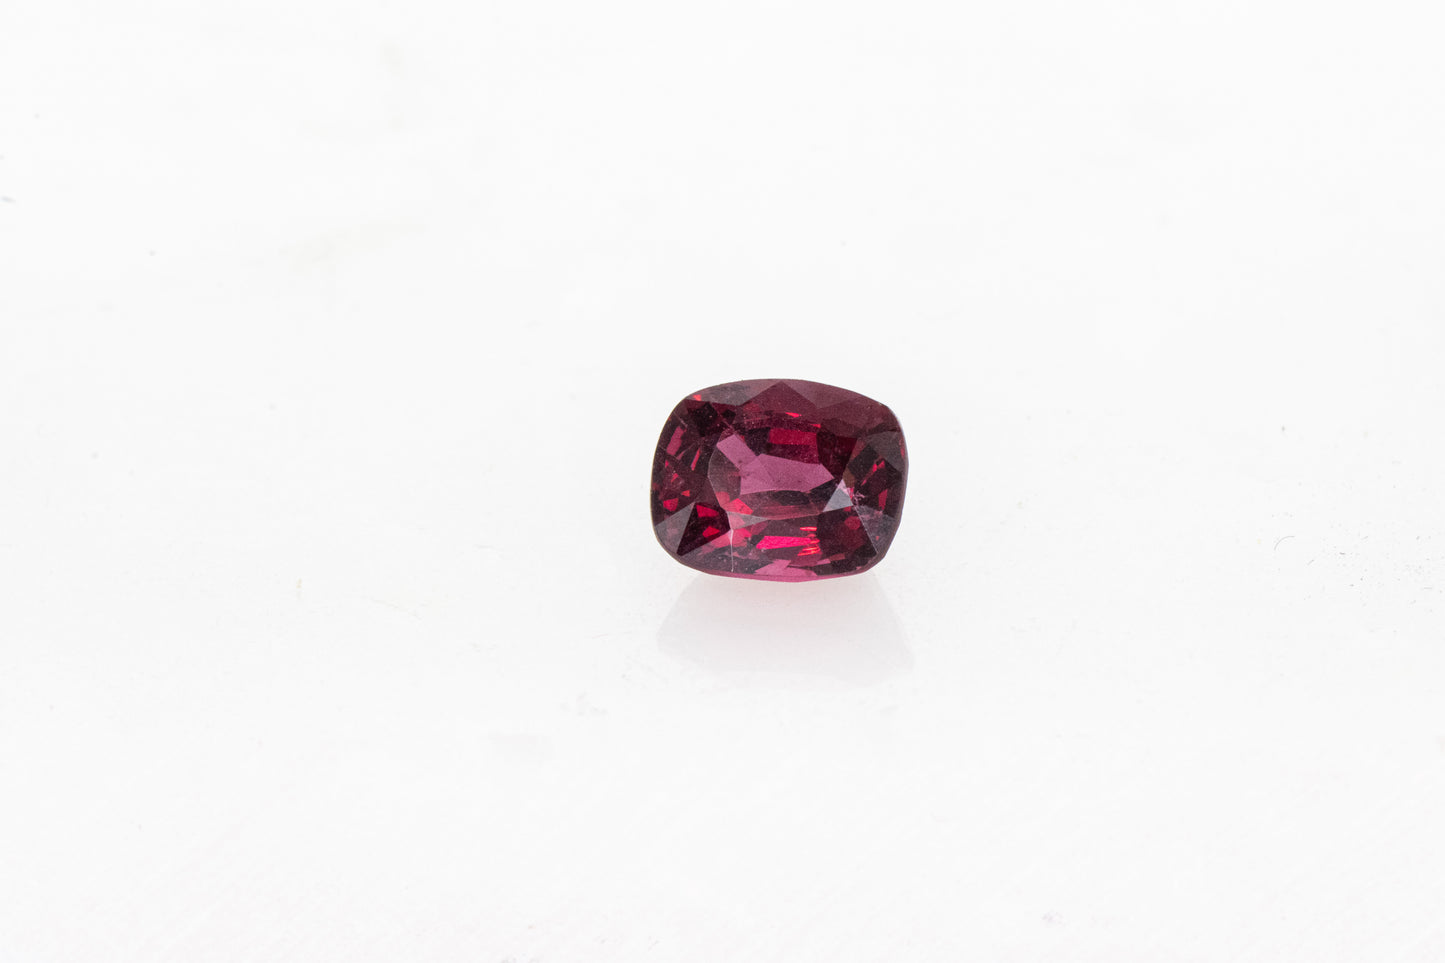 A Red Spinel Cushion Cut 8x6MM gemstone on a white background by Cassin Jewelry.